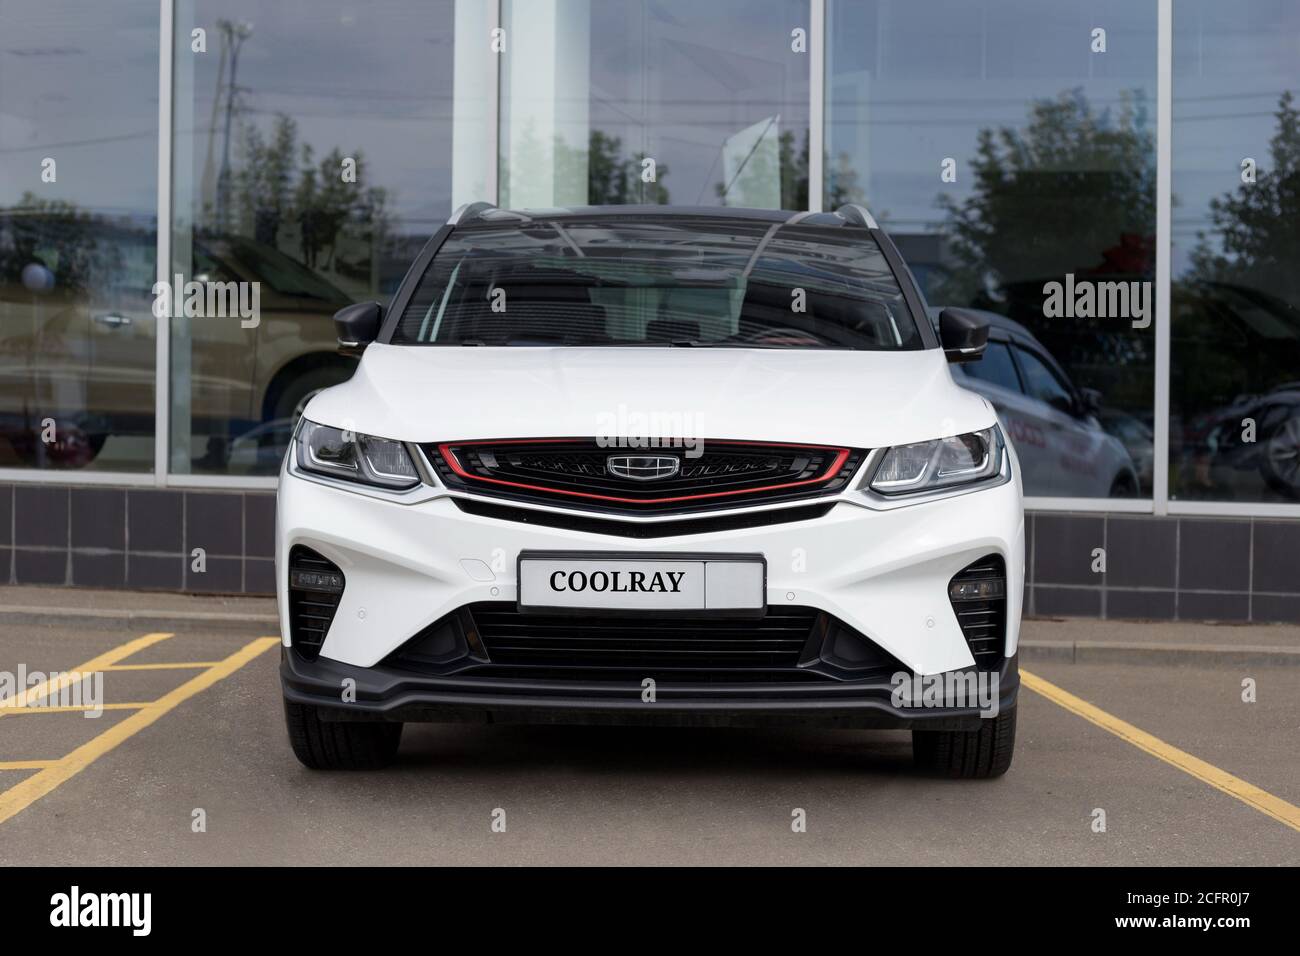 Russia, Izhevsk - August 14, 2020: Geely showroom. New modern CoolRay is standing near the dealer showroom. Front view. Car manufacturer from China. Stock Photo